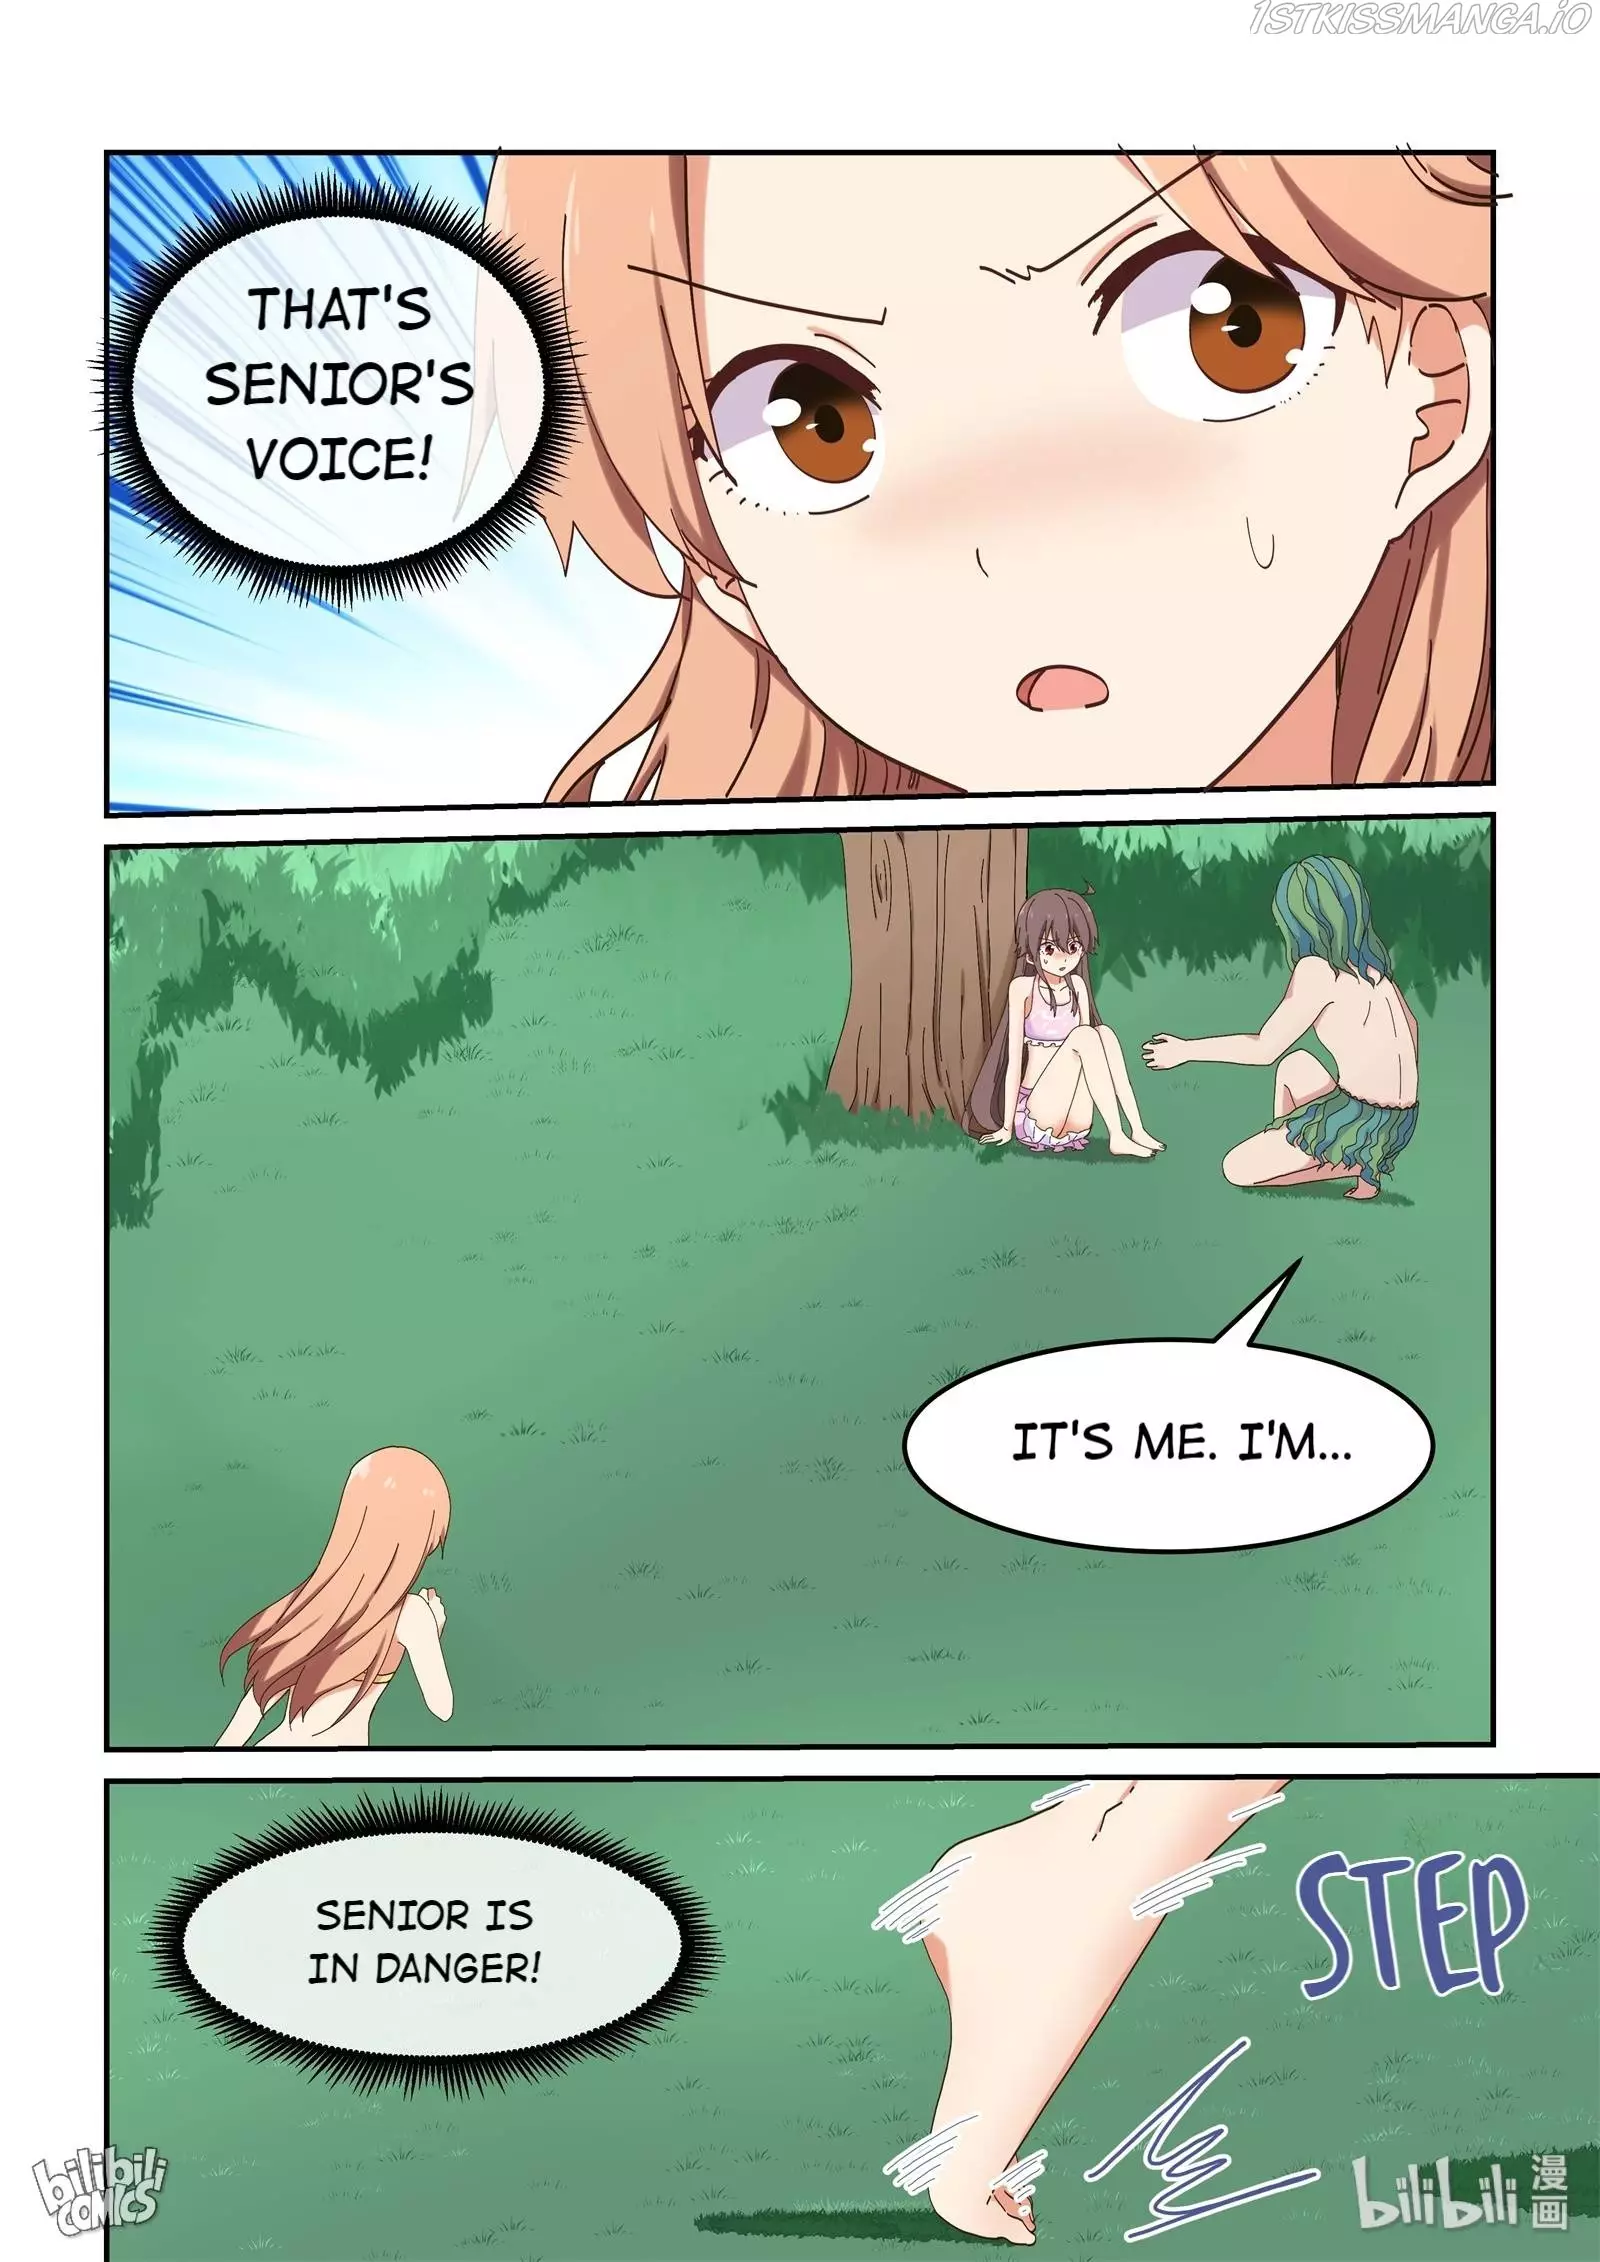 I Decided To Offer Myself To Motivate Senpai - 62 page 3-6deec25f